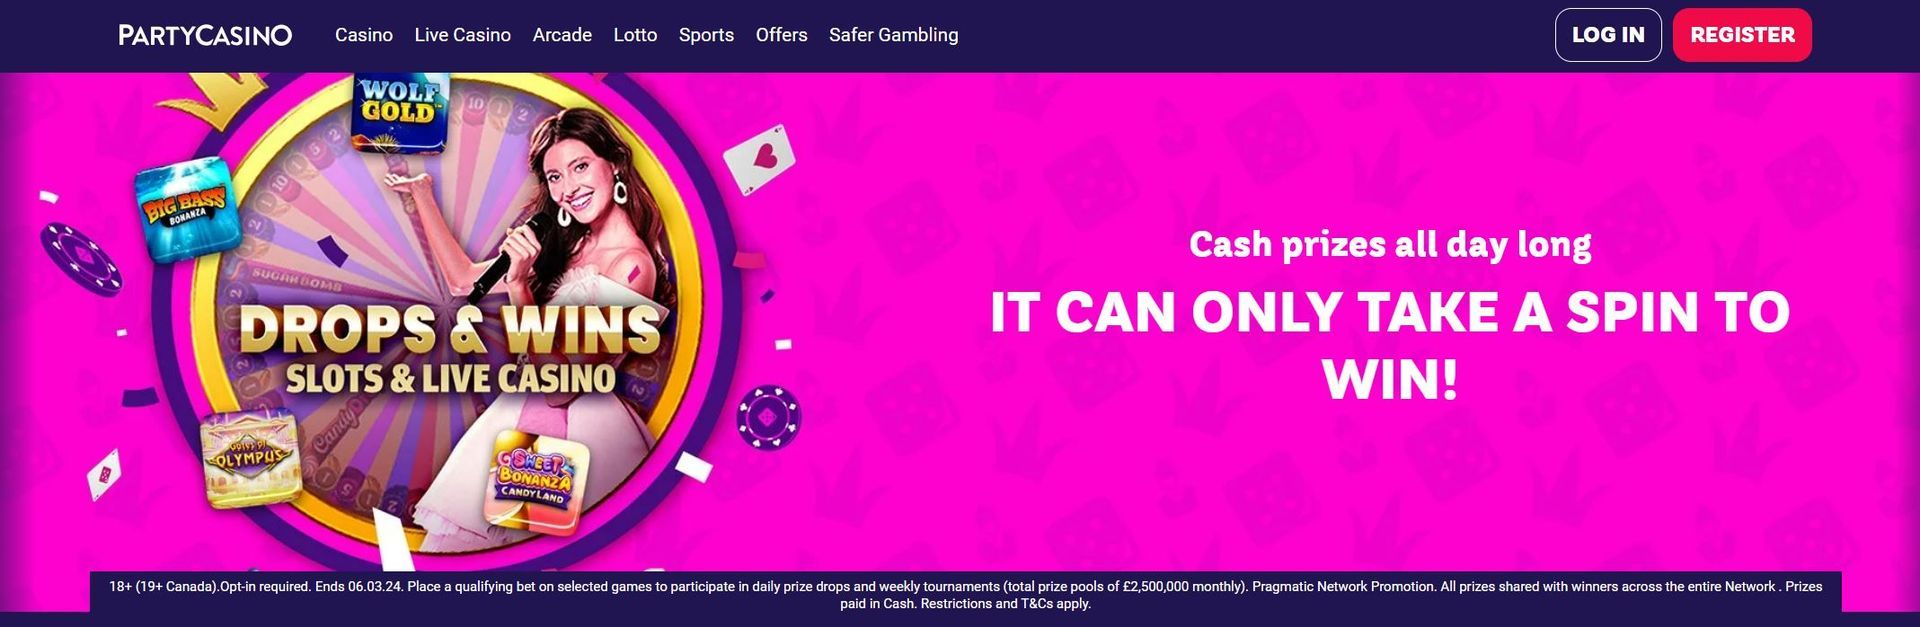 party casino Offer from Go Gambling